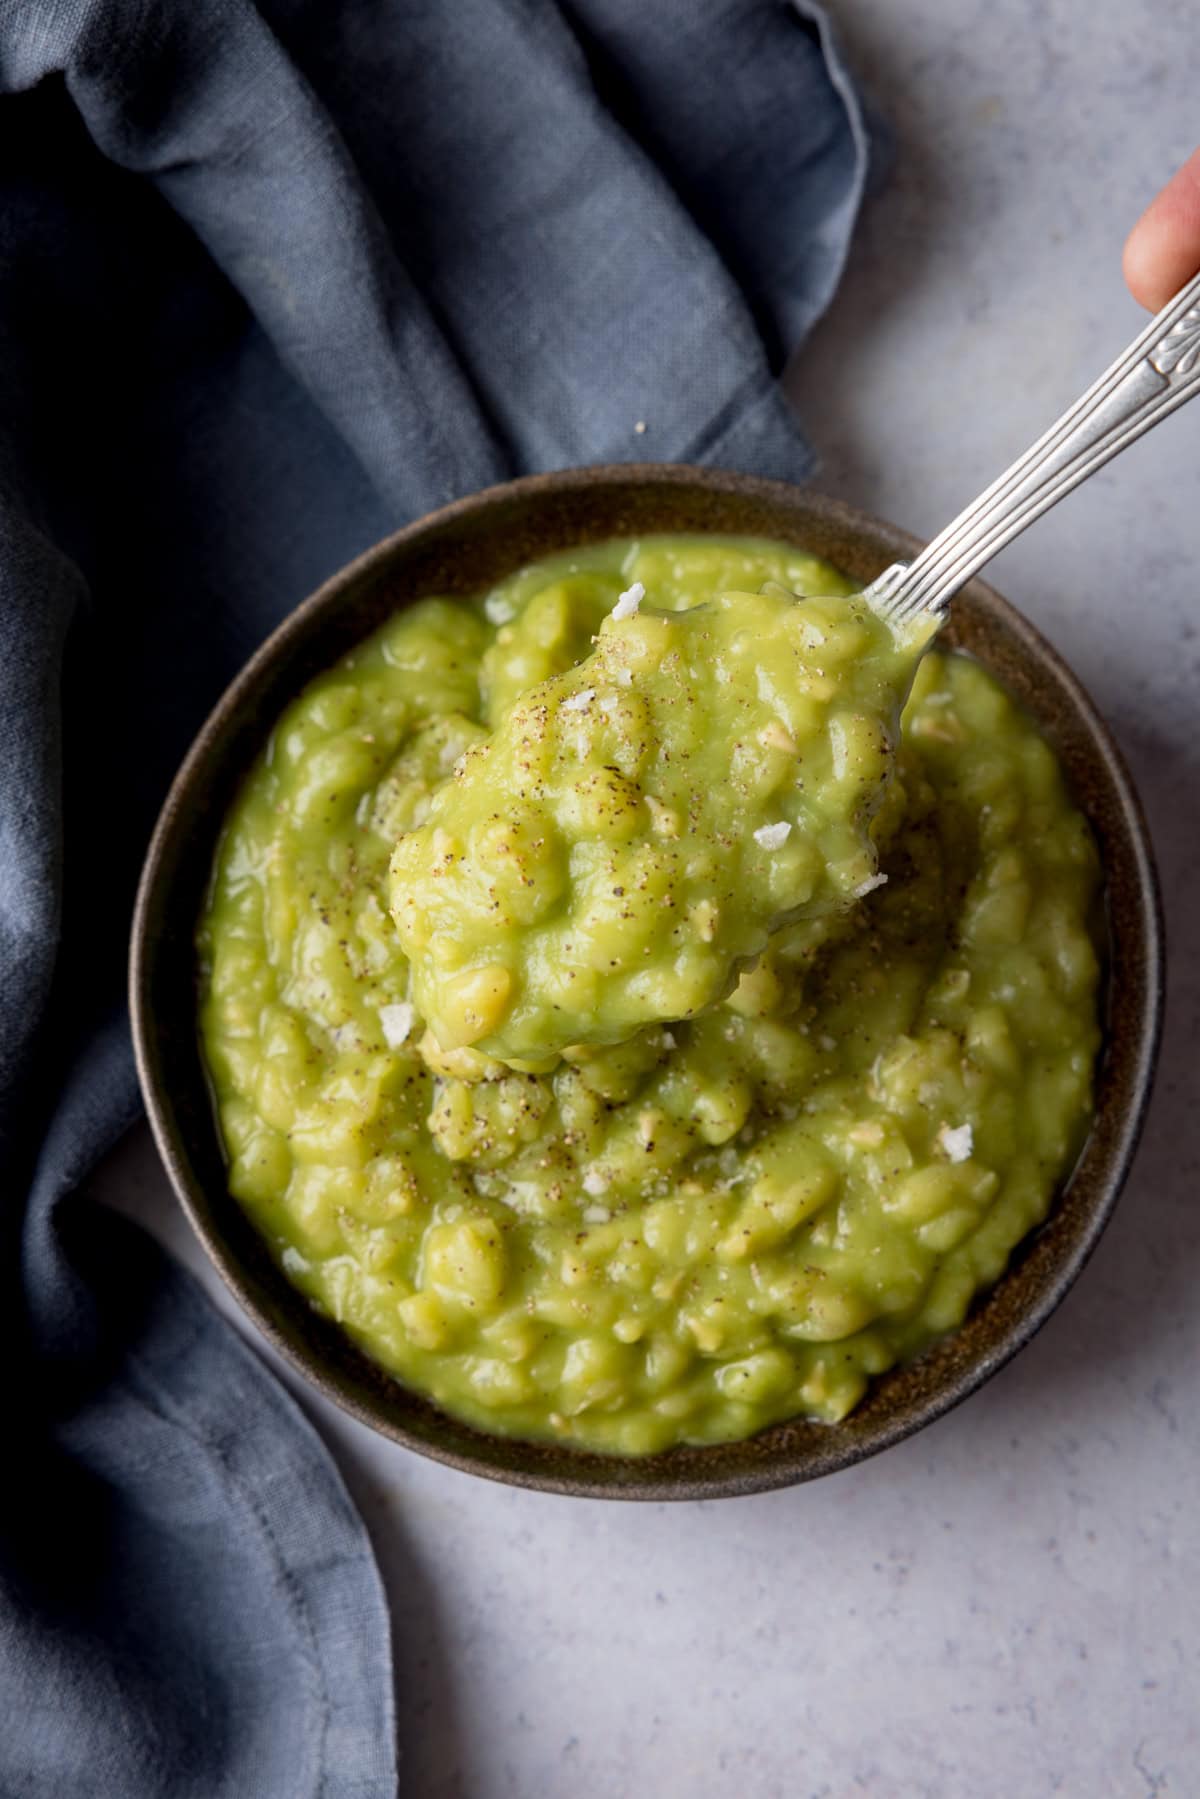 A tall, overhead shot of Chip Shop Style Mushy Peas in a black bowl. There is a silver spoon, sticking out of the right of the dish. A slate grey napkin covers the left of the background. The background is light grey.